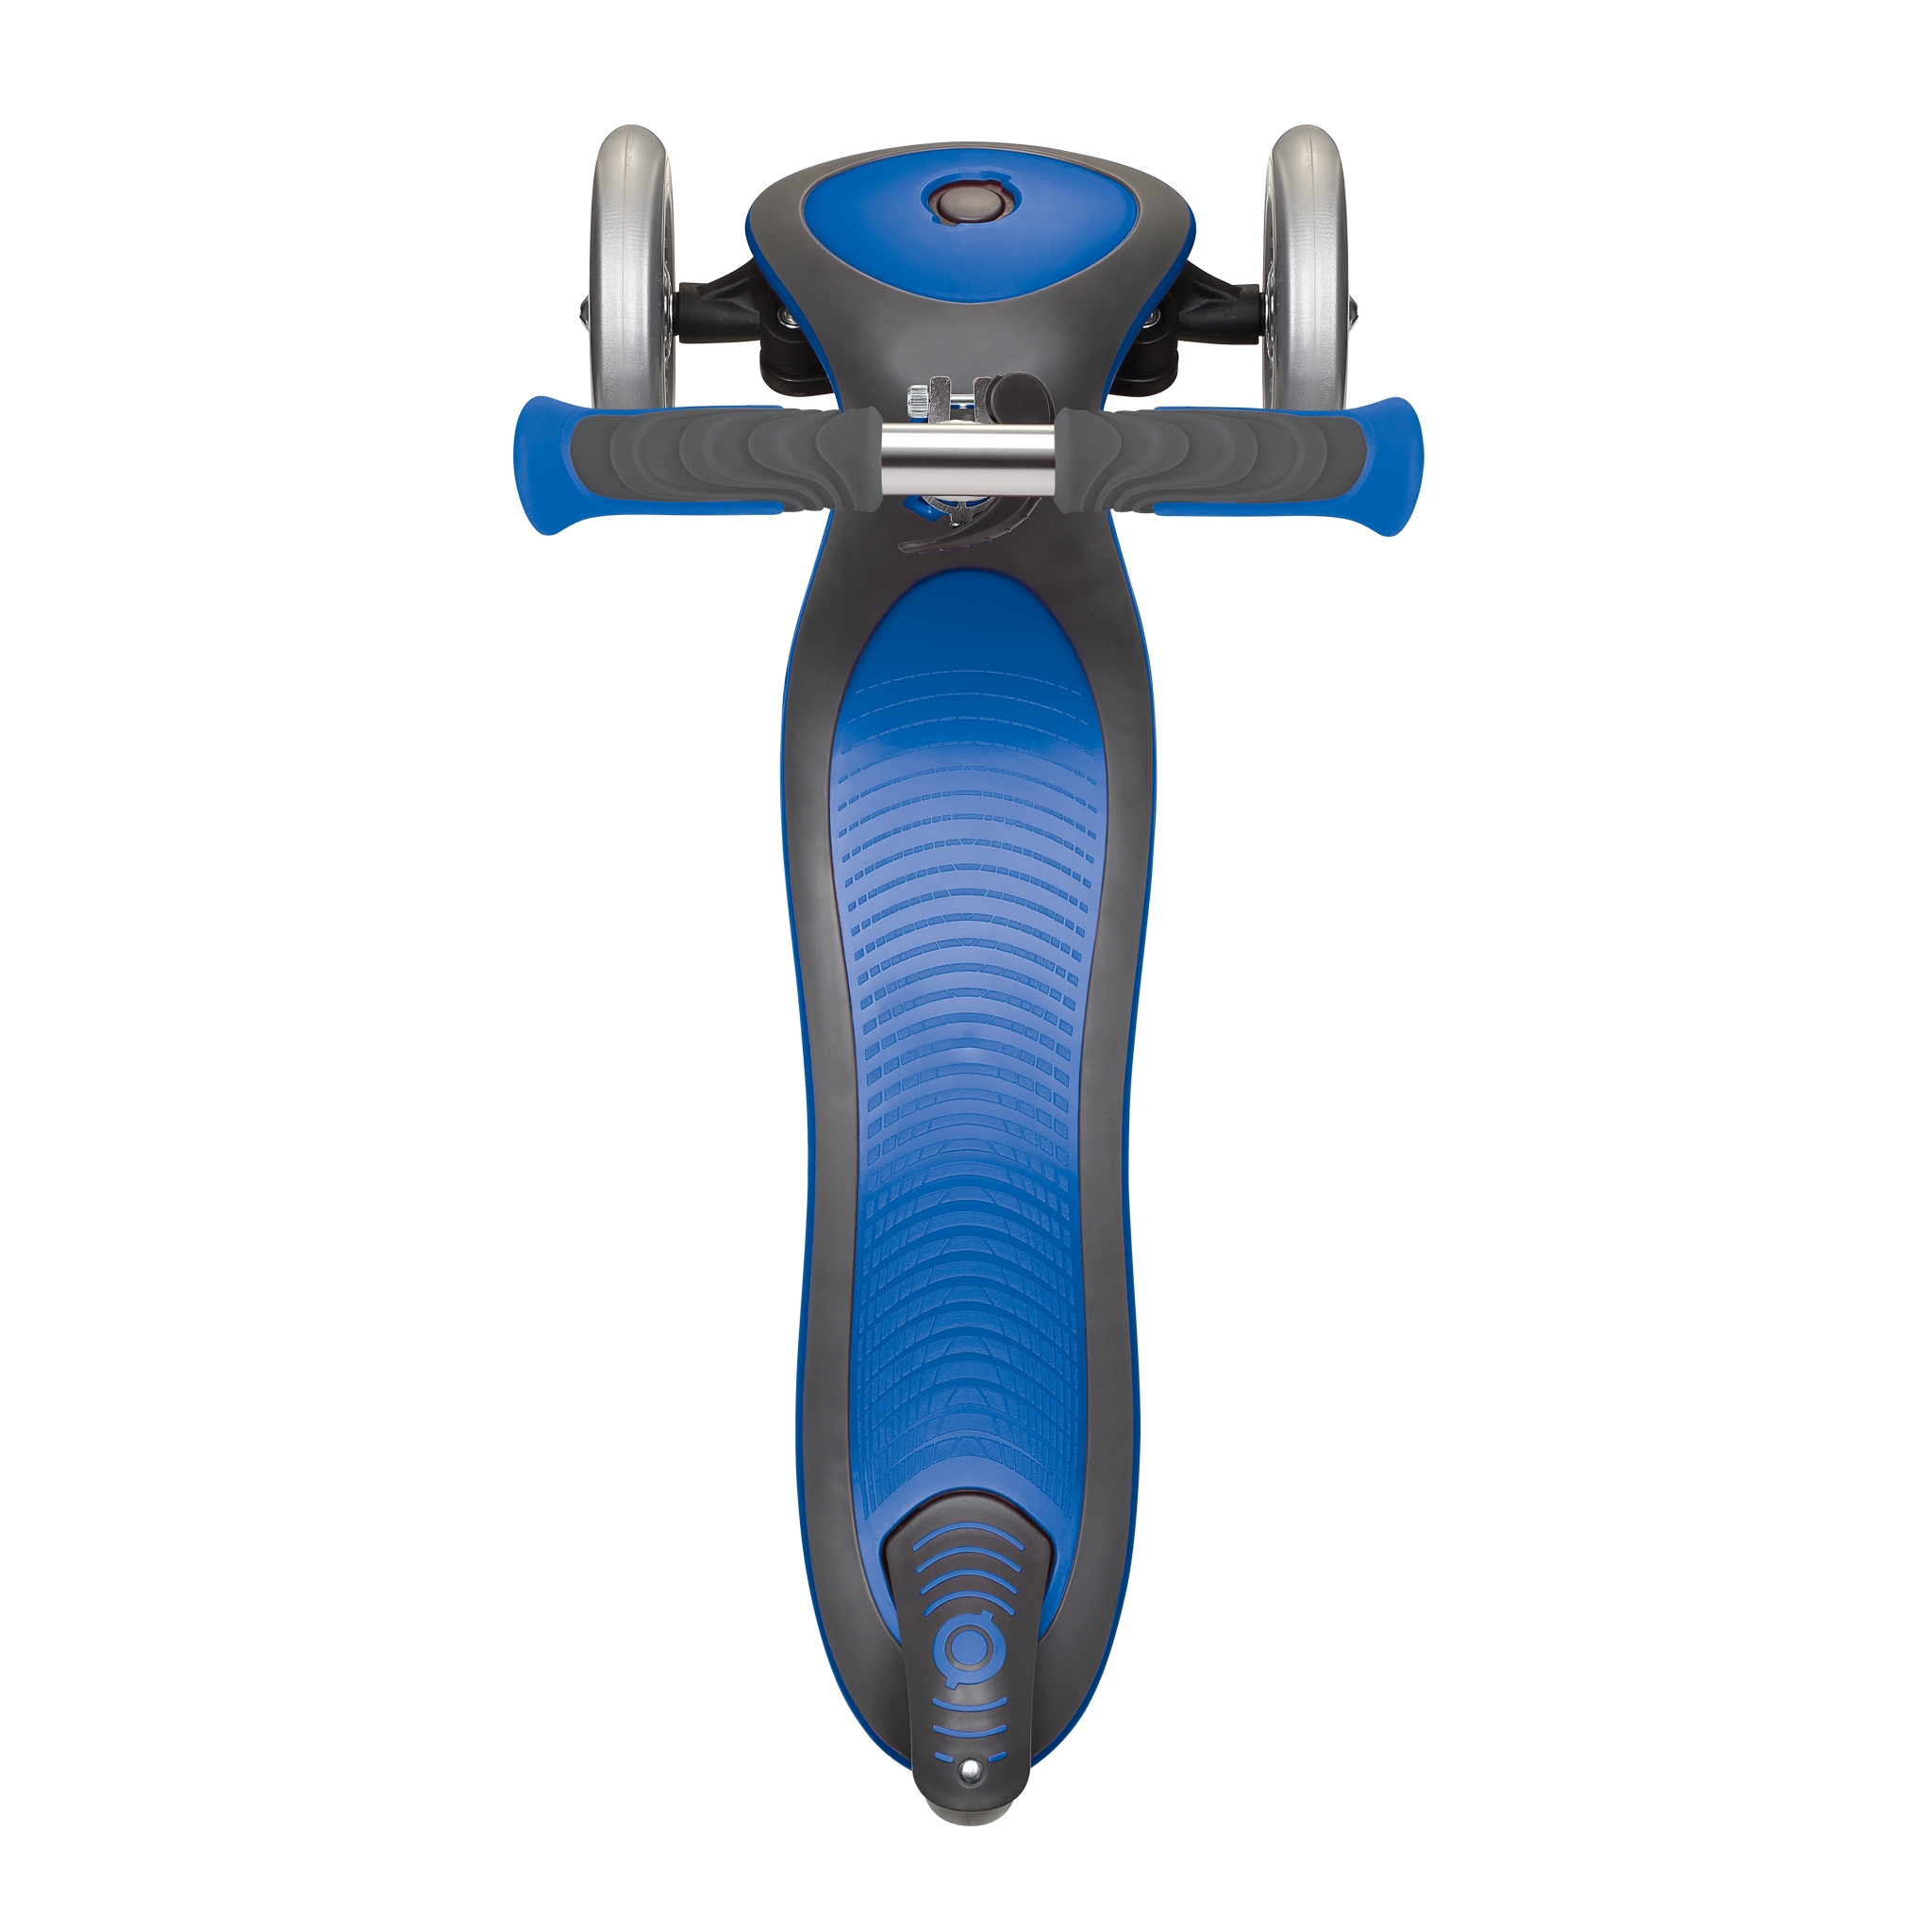 Globber-ELITE-DELUXE-3-wheel-foldable-scooter-for-kids-with-extra-wide-scooter-deck-navy-blue 4